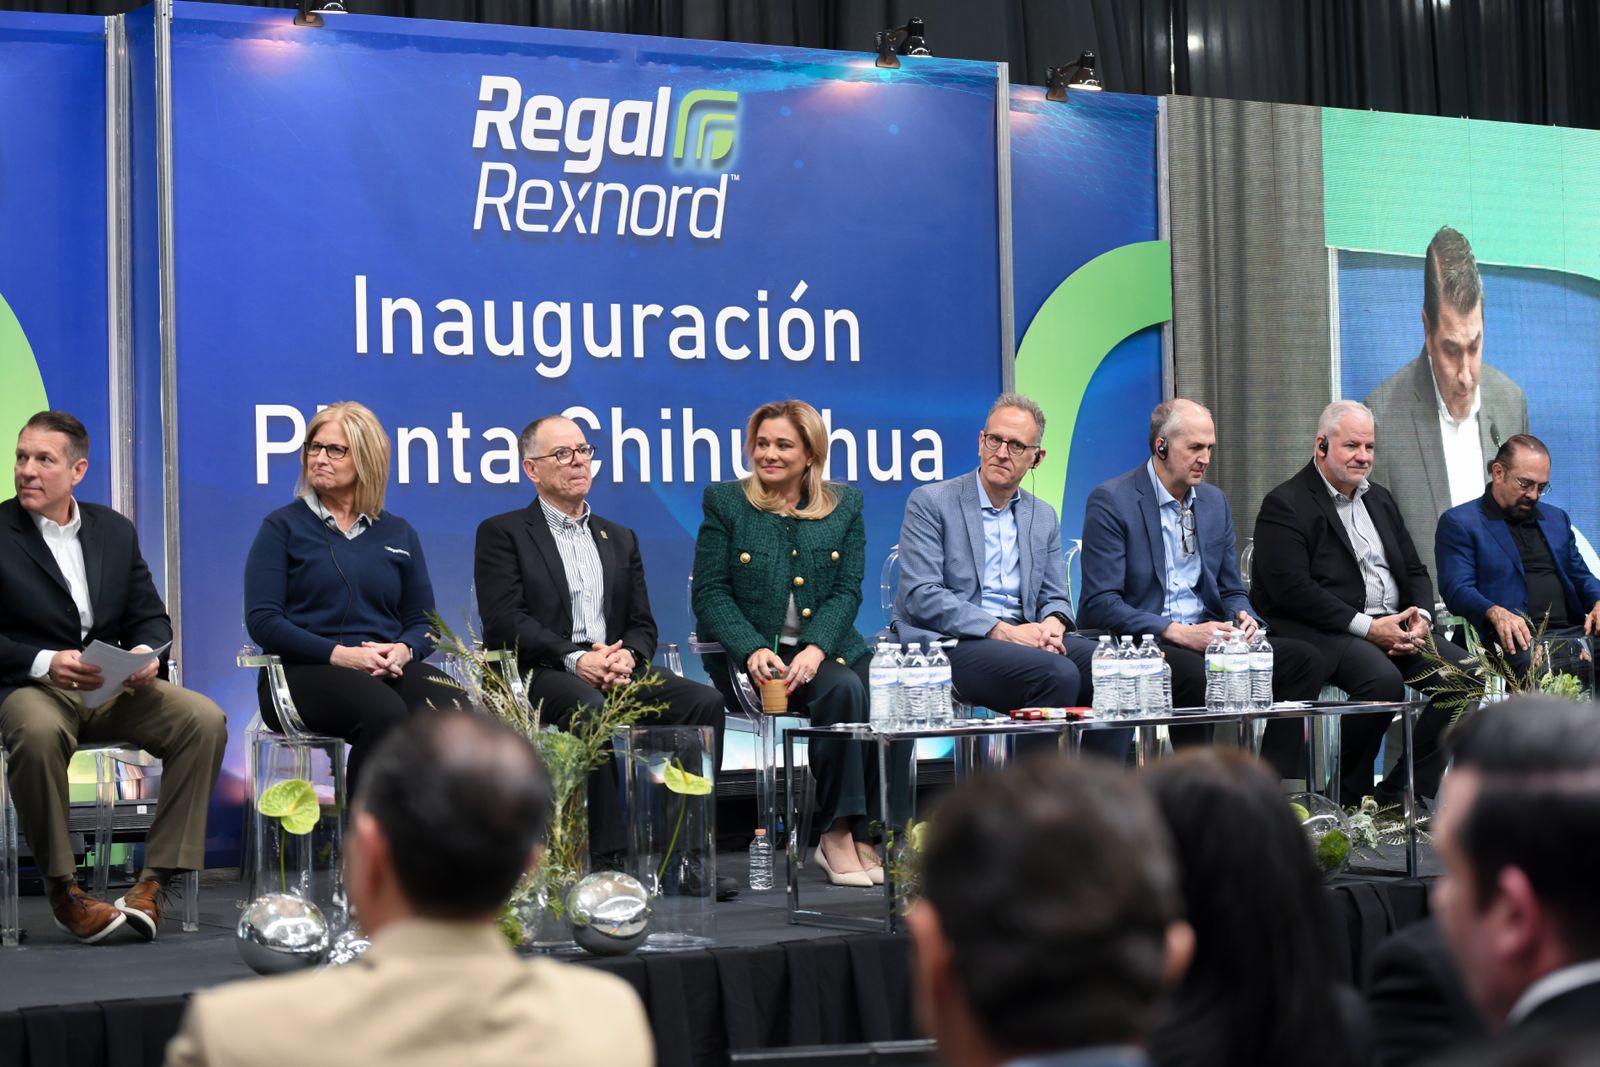 New Regal Rexnord plant begins operations in Chihuahua